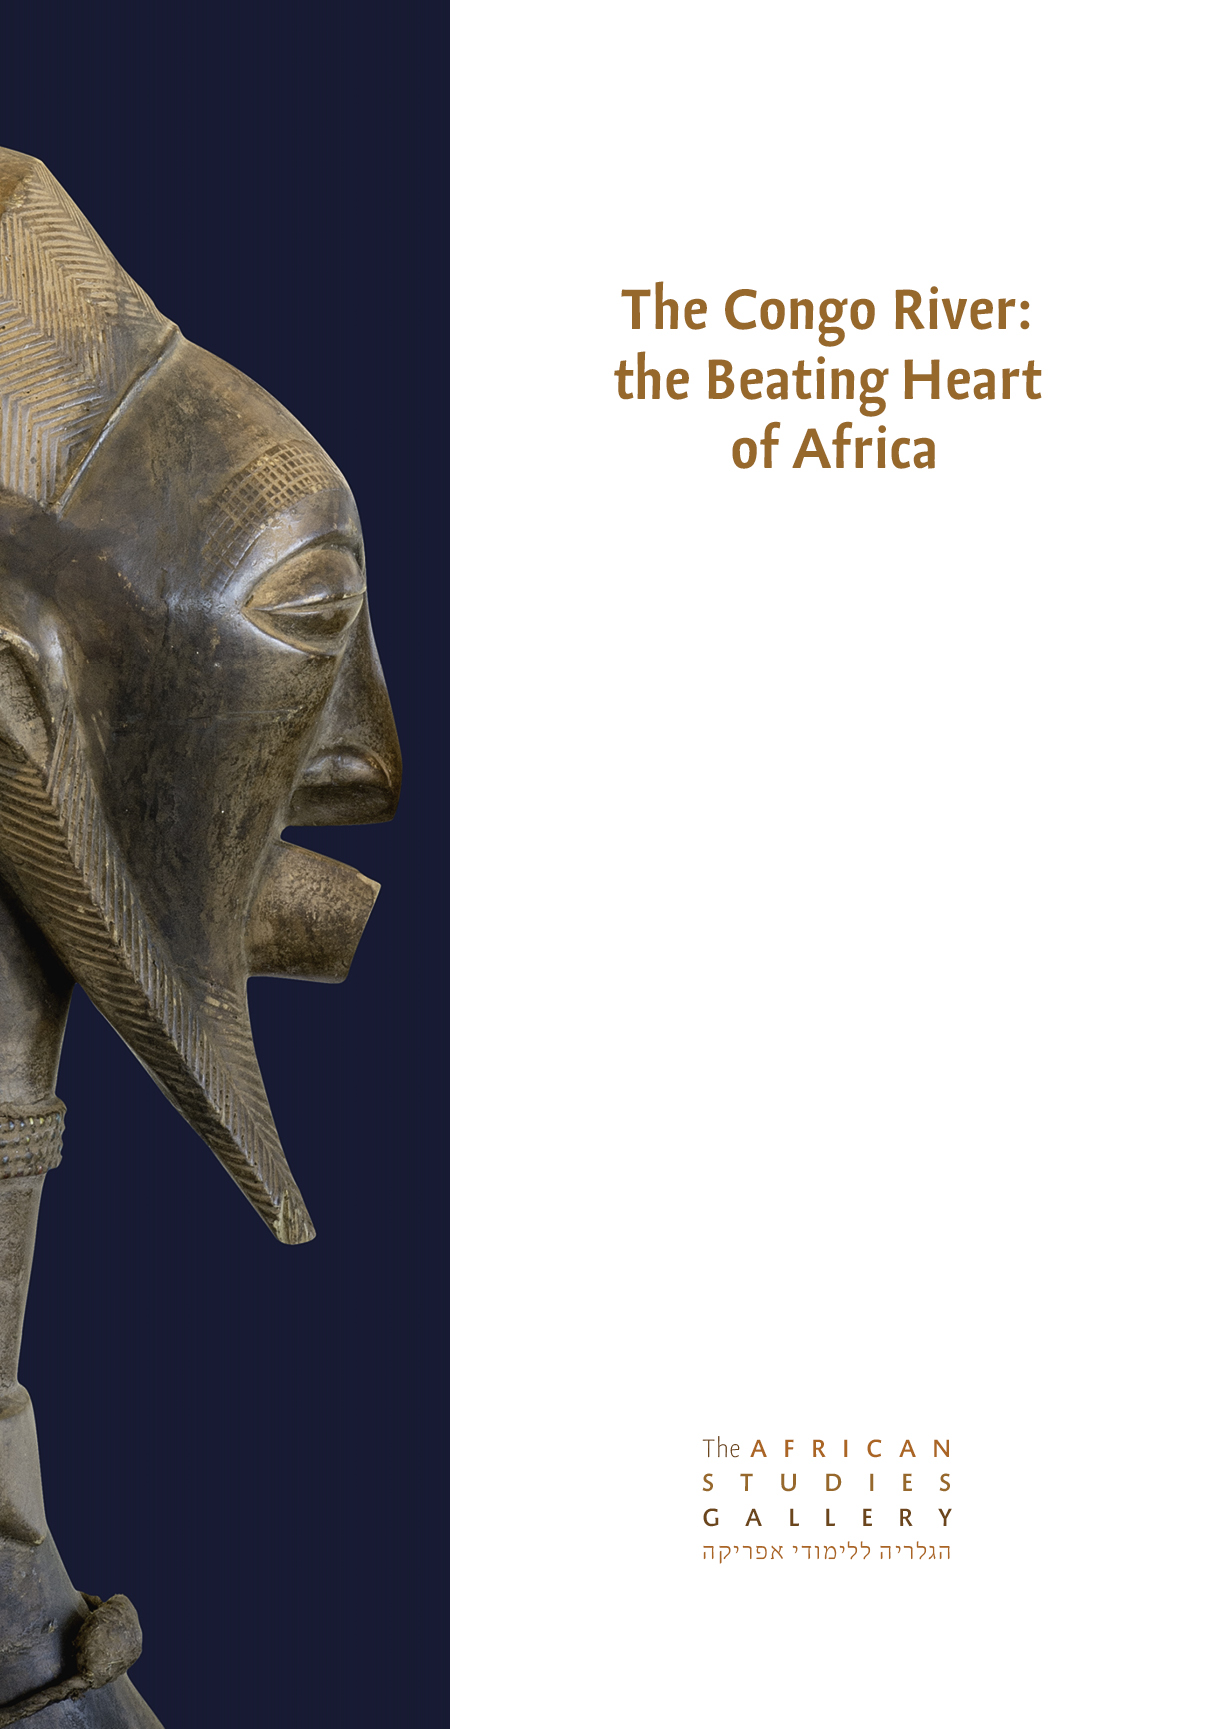 https://www.africanstudiesgallery.org/catalogues/5-congo-river.pdf